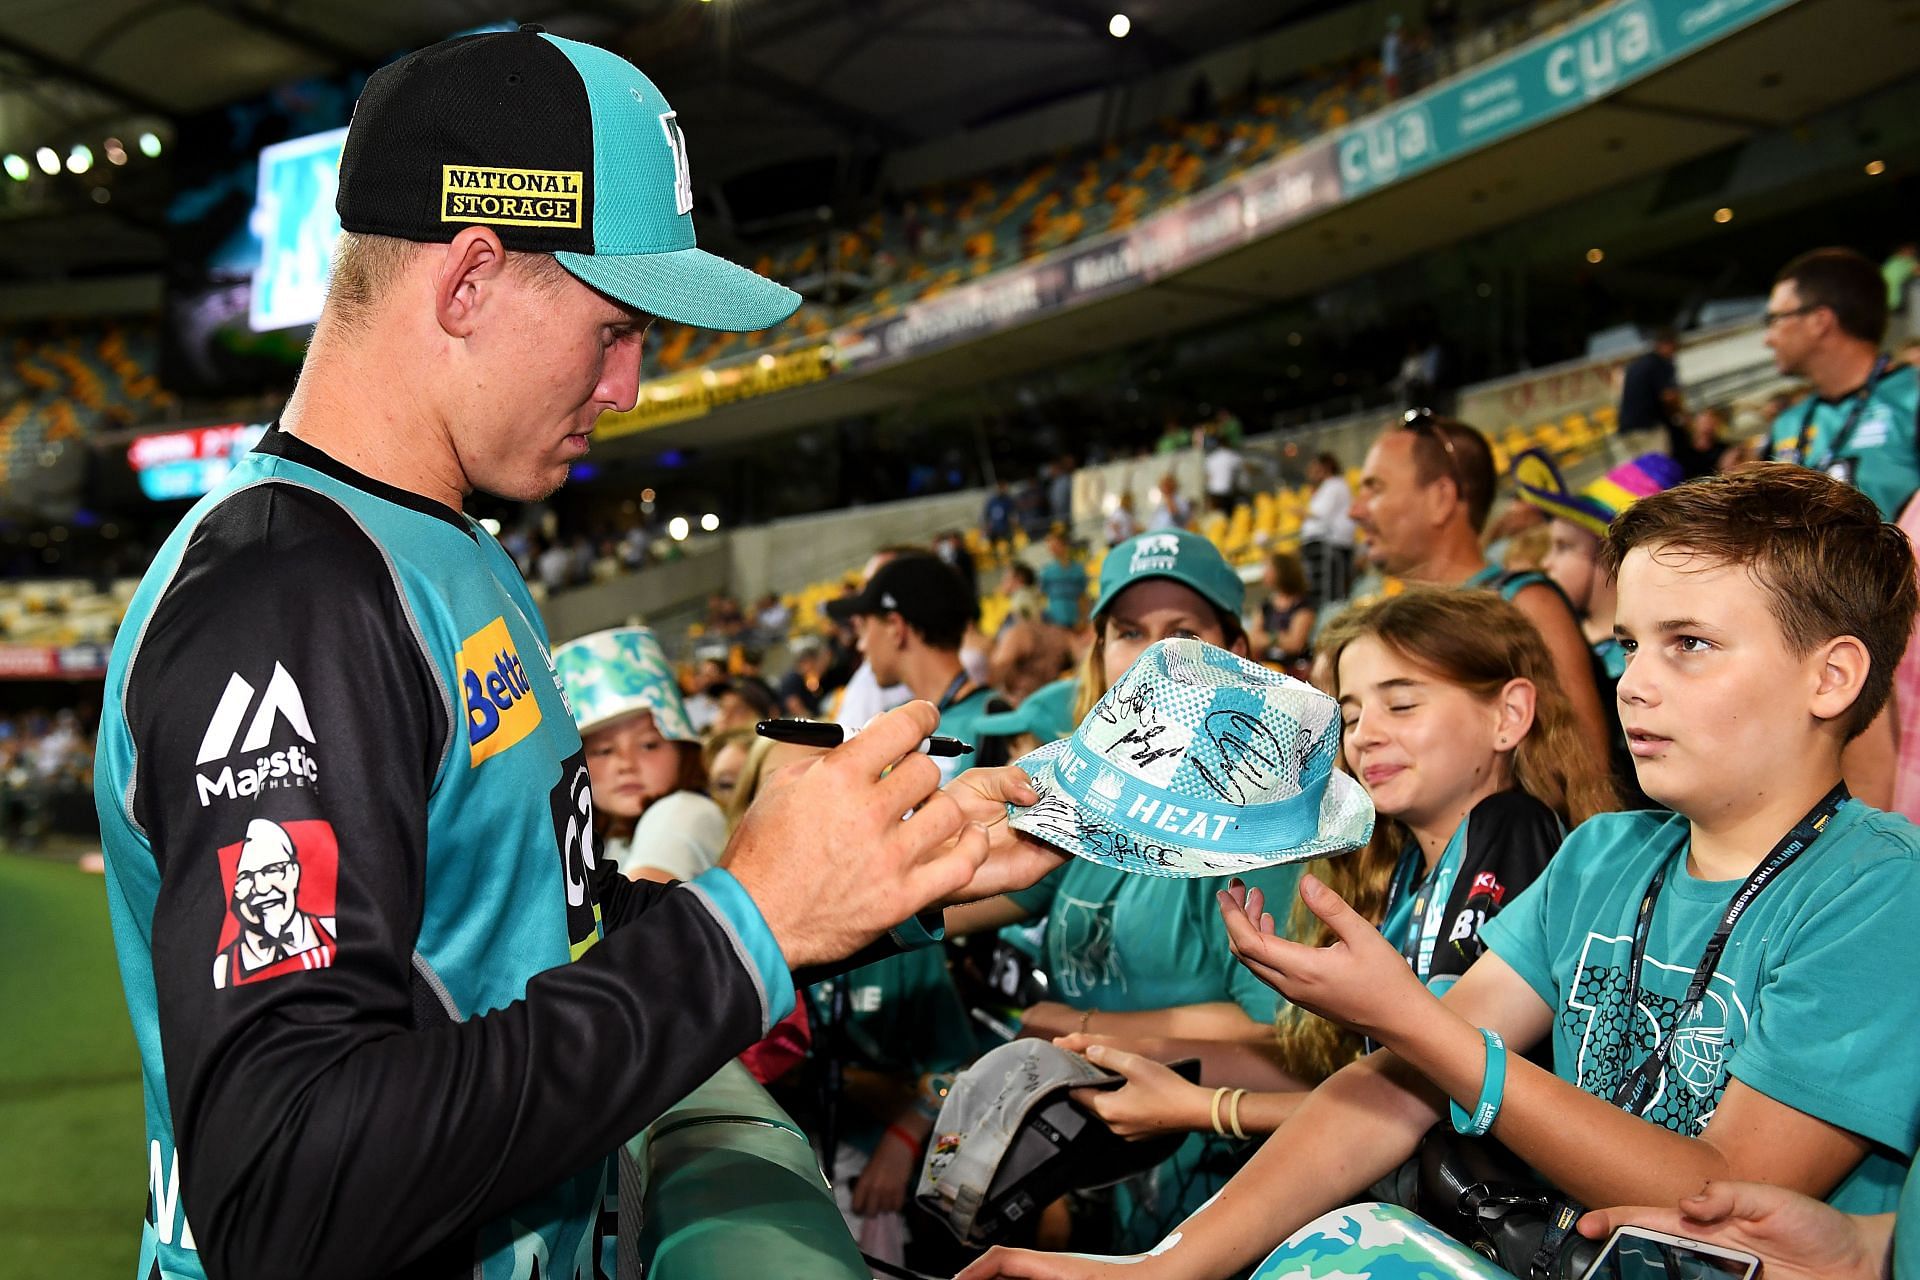 Marnus Labuschagne has become a fan favorite and could win over the fans should he play the IPL 2022 season.